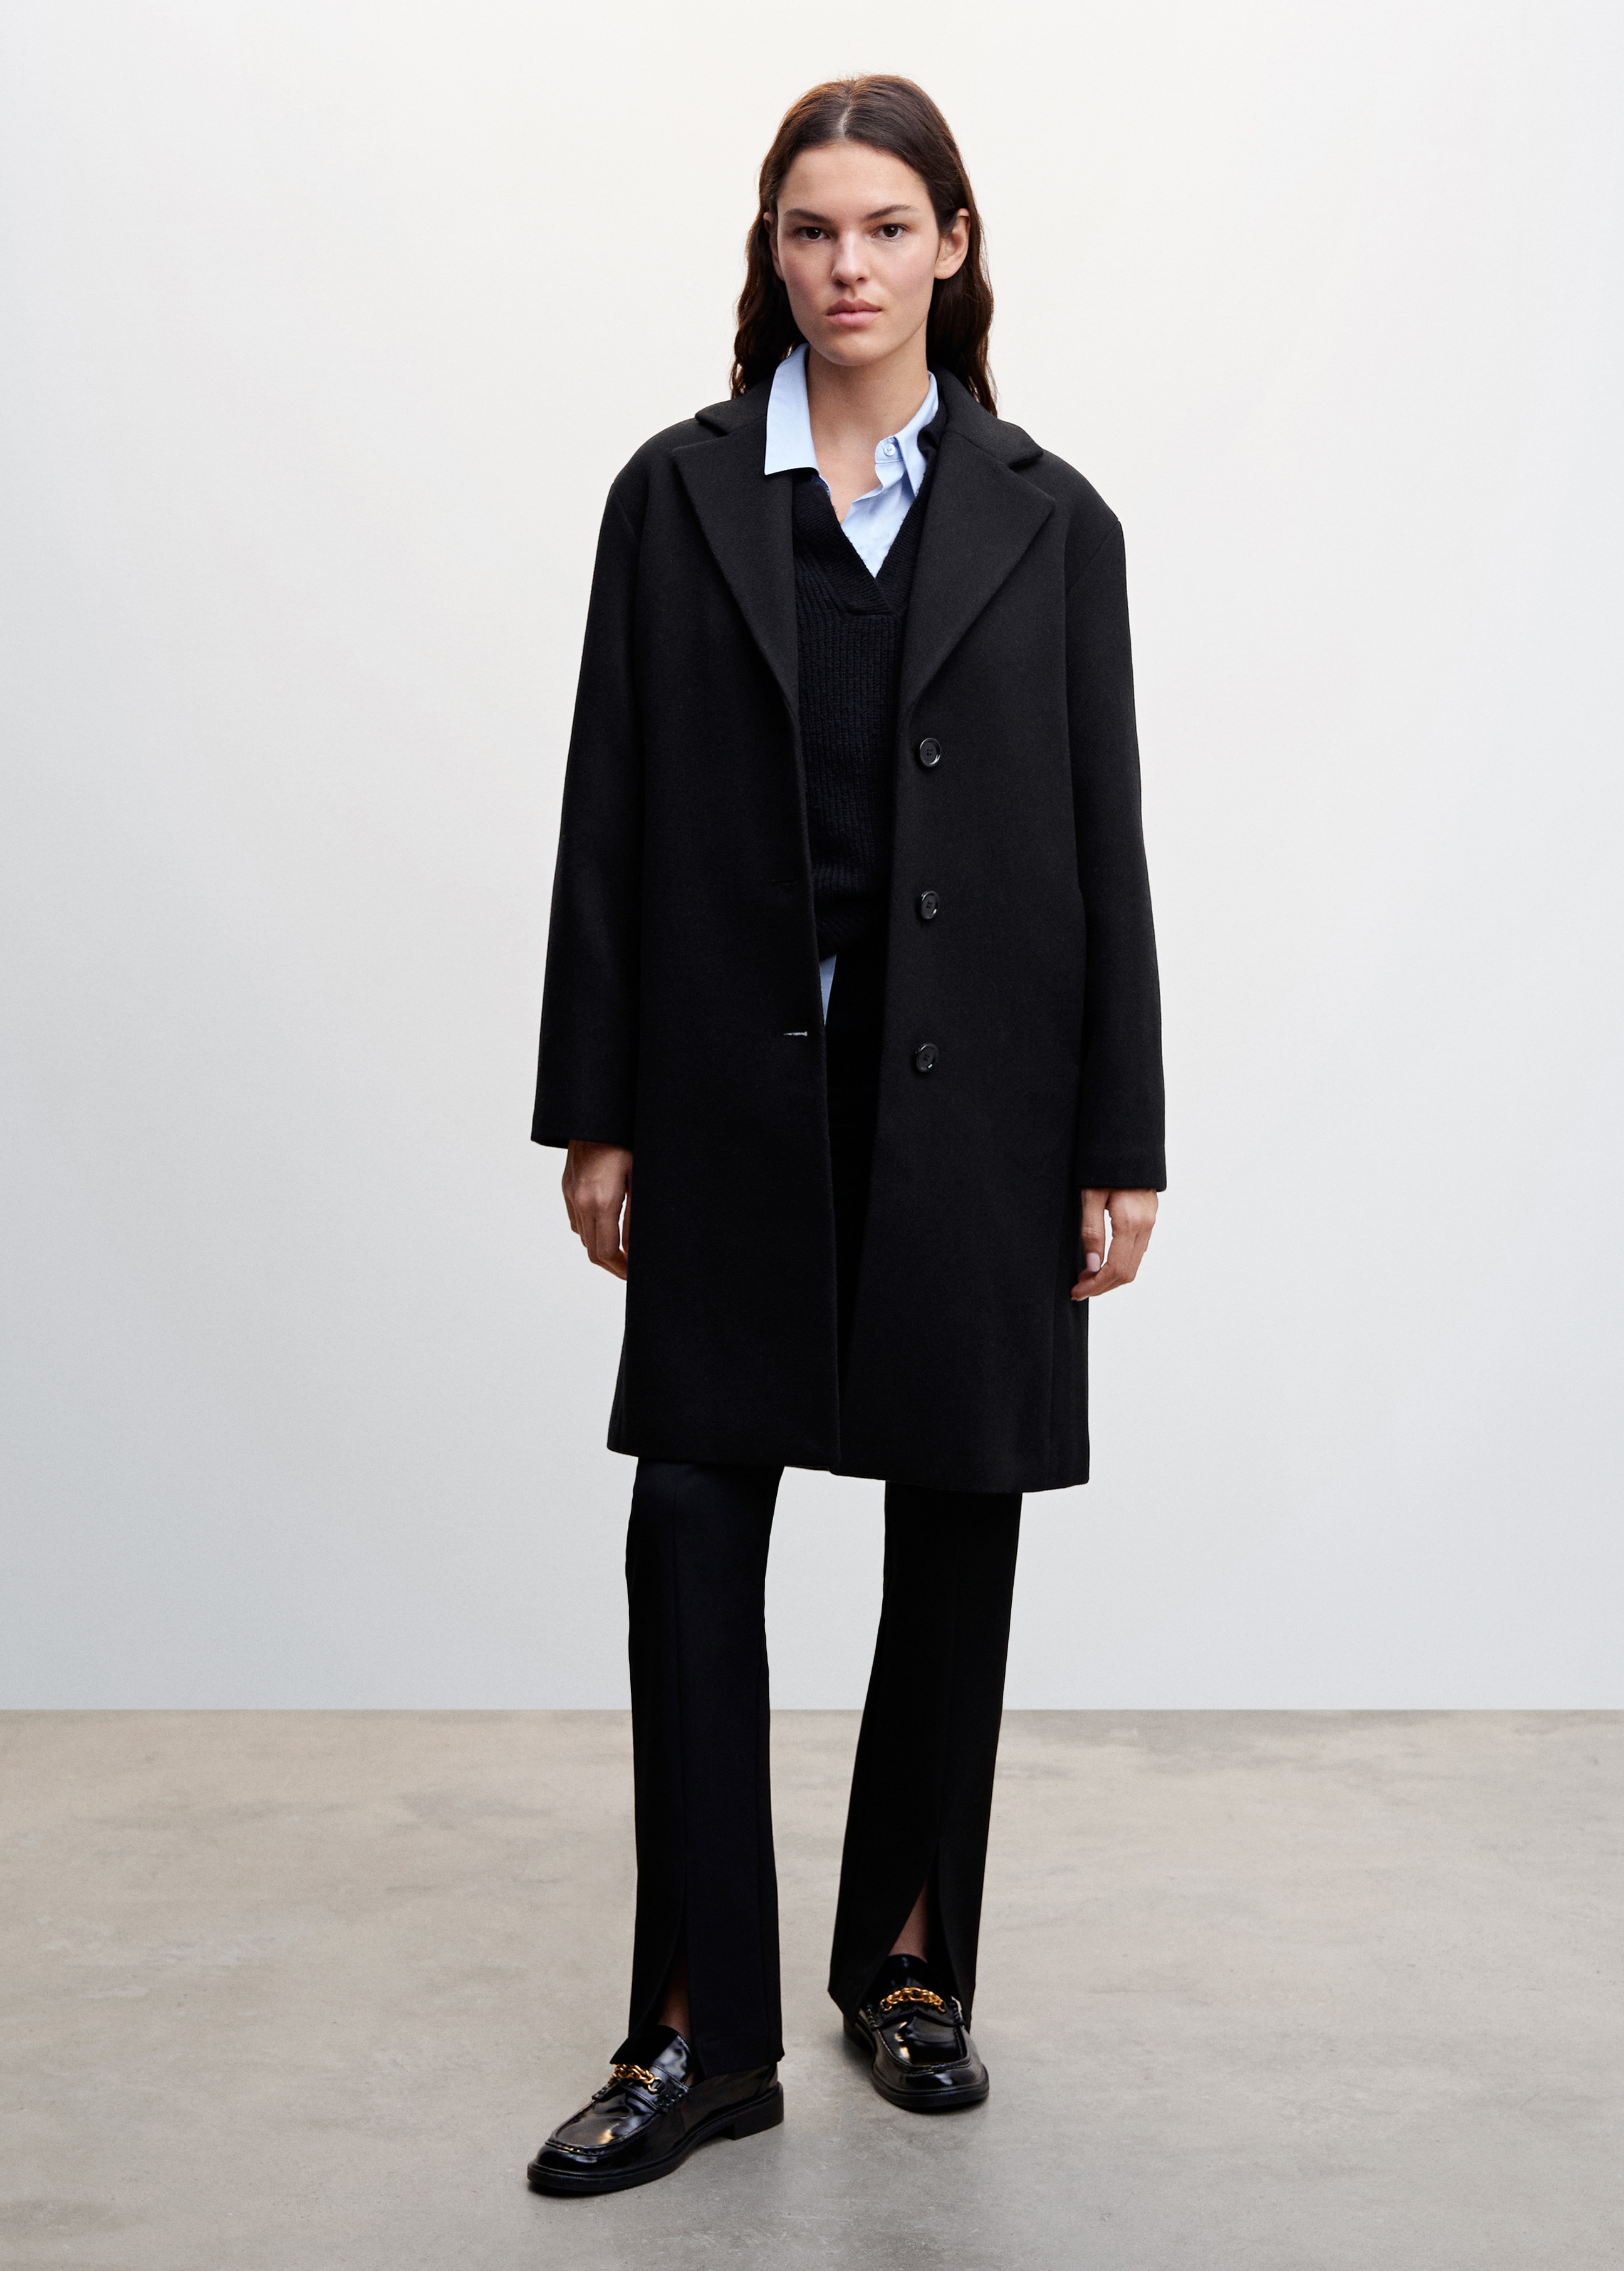 Buttoned wool coat - General plane